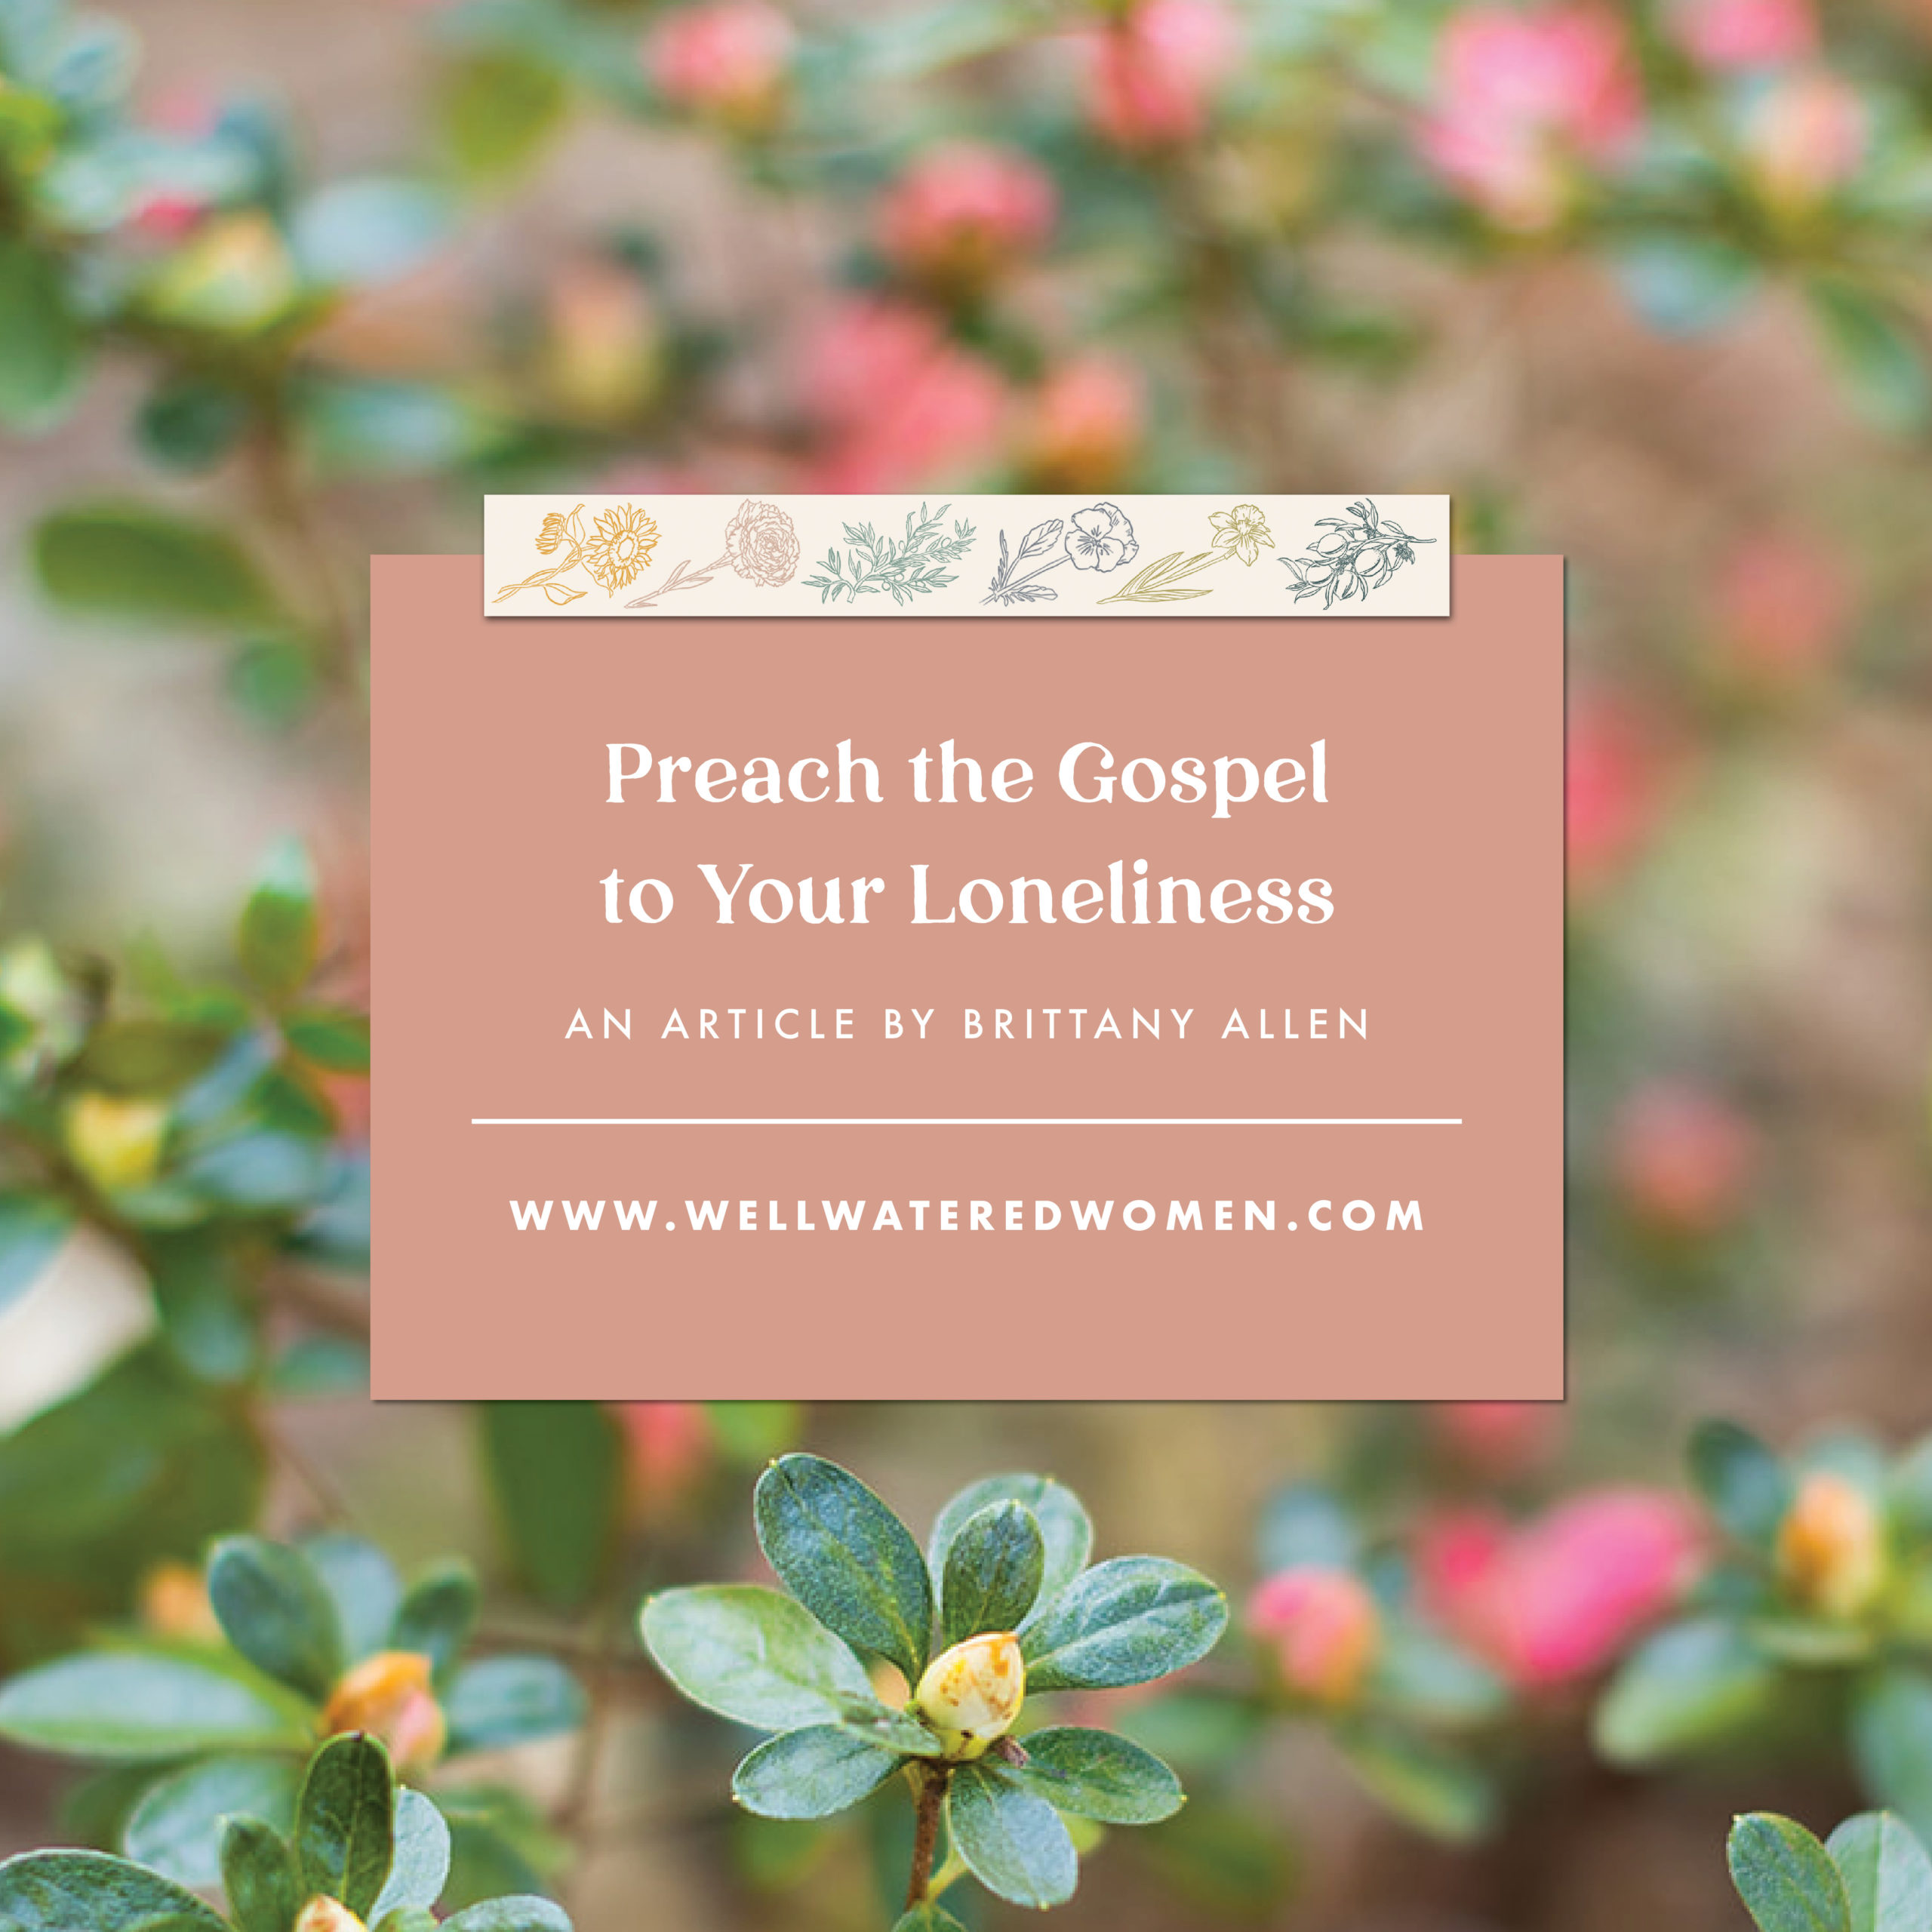 Preach the Gospel to Your Loneliness